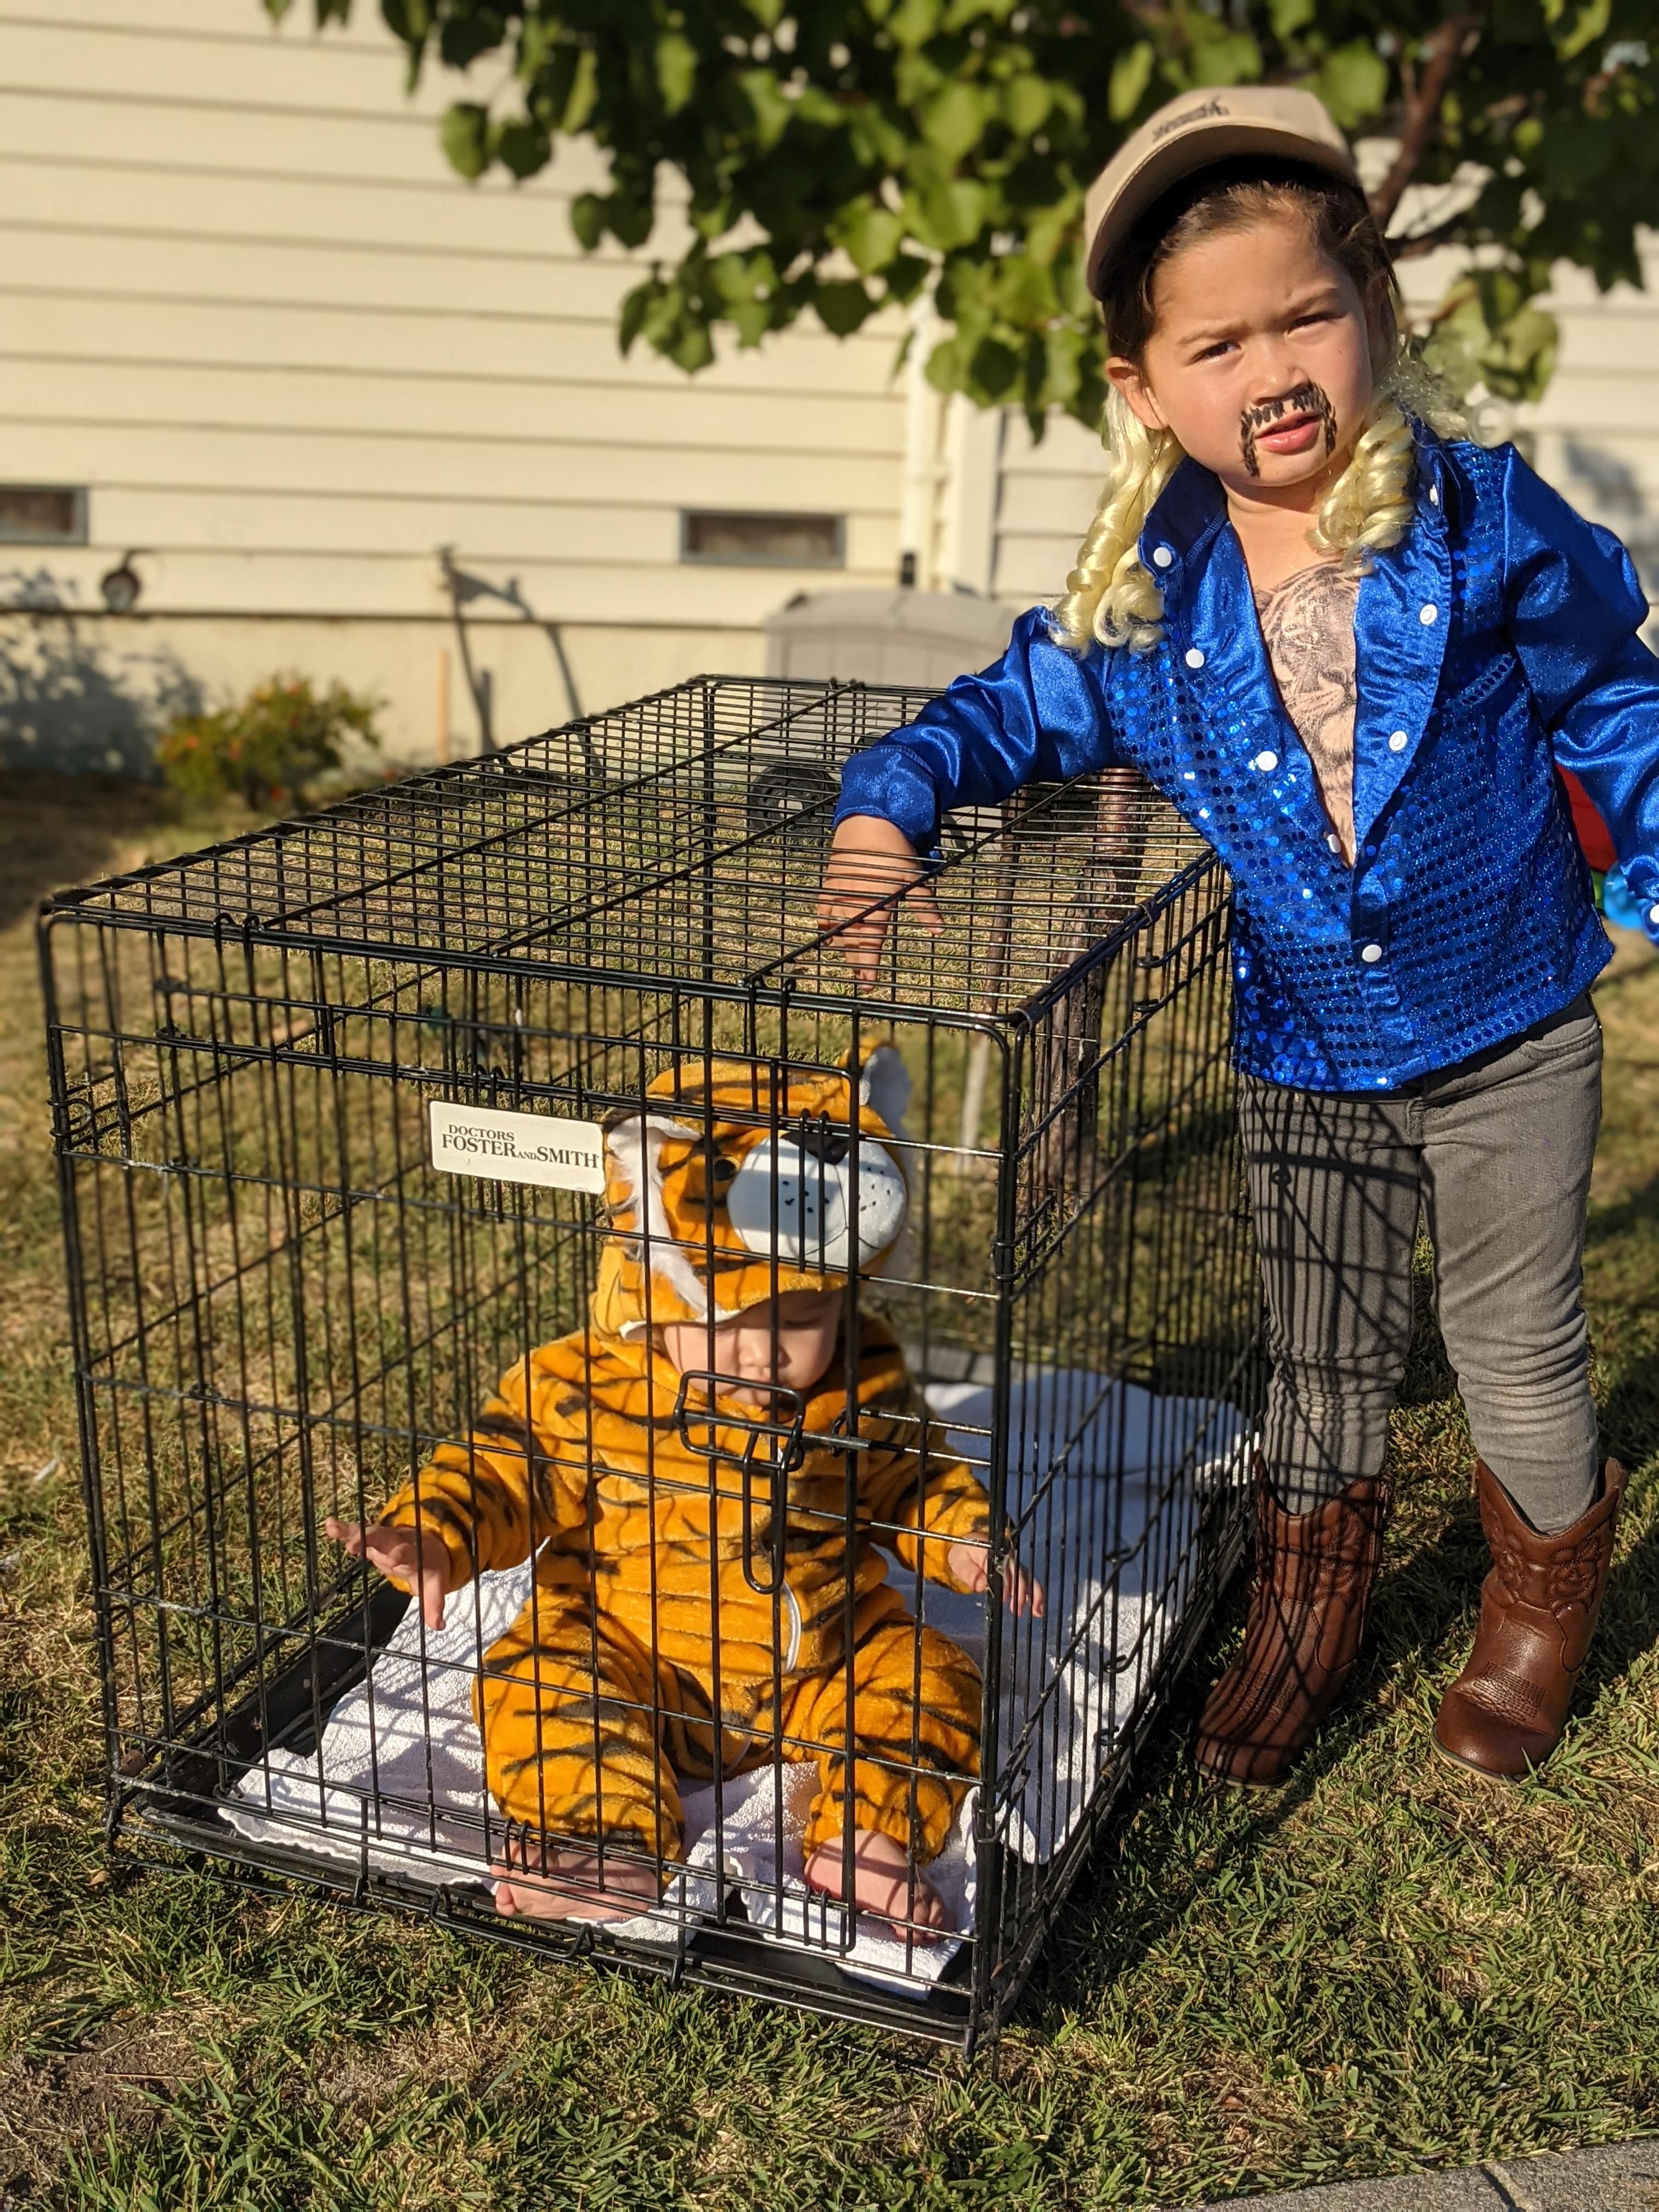 Convinced our 3yo daughter that dressing up as tiger king is cooler than being Elsa